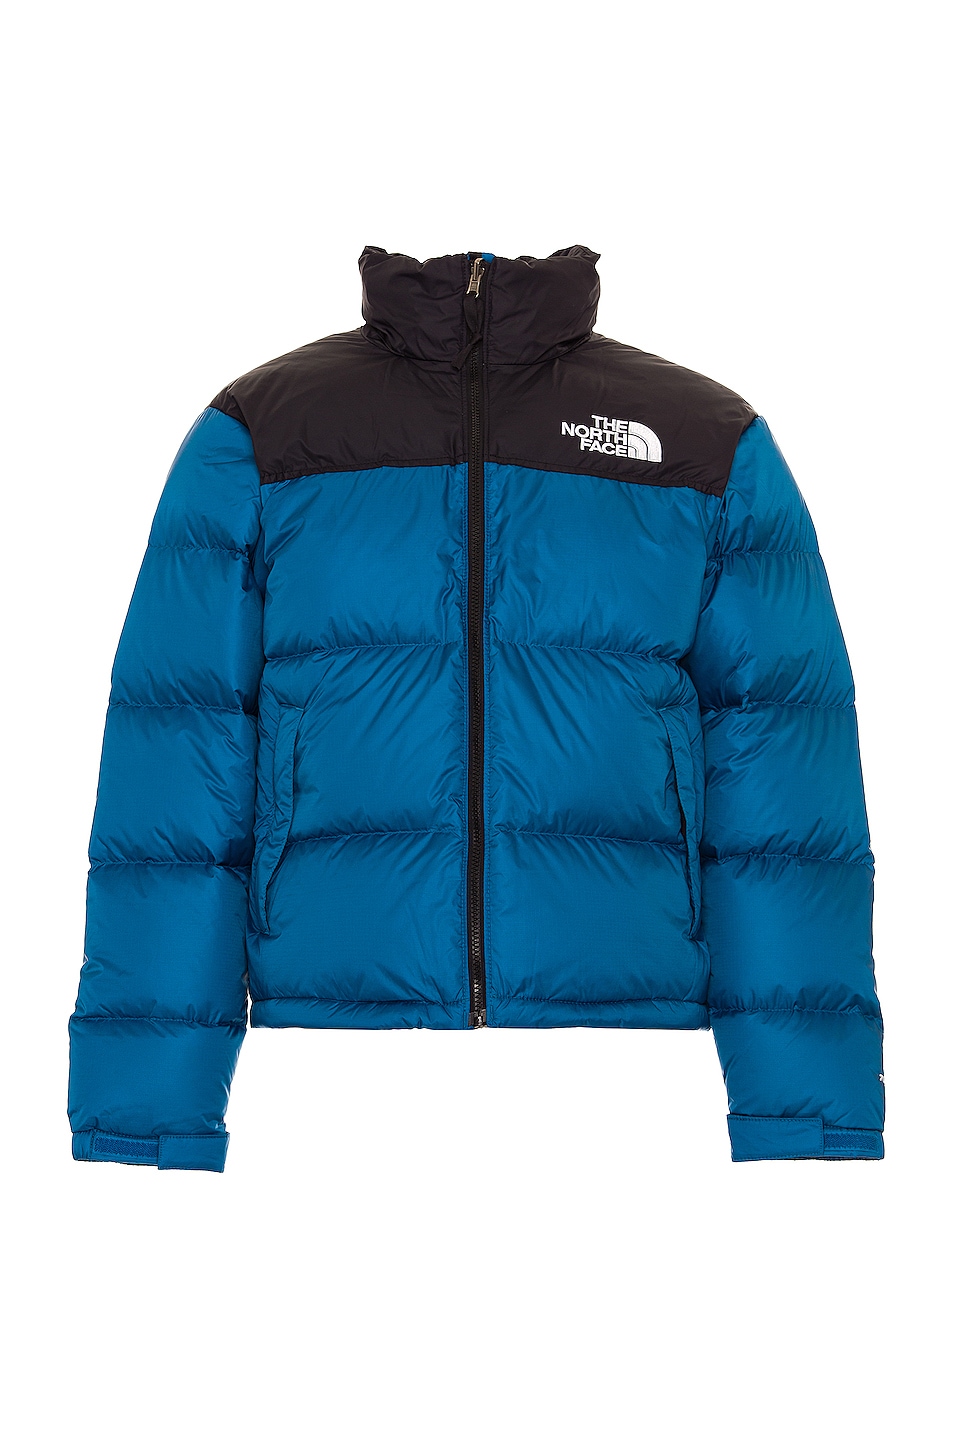 Image 1 of The North Face 1996 Retro Nuptse Jacket in Banff Blue